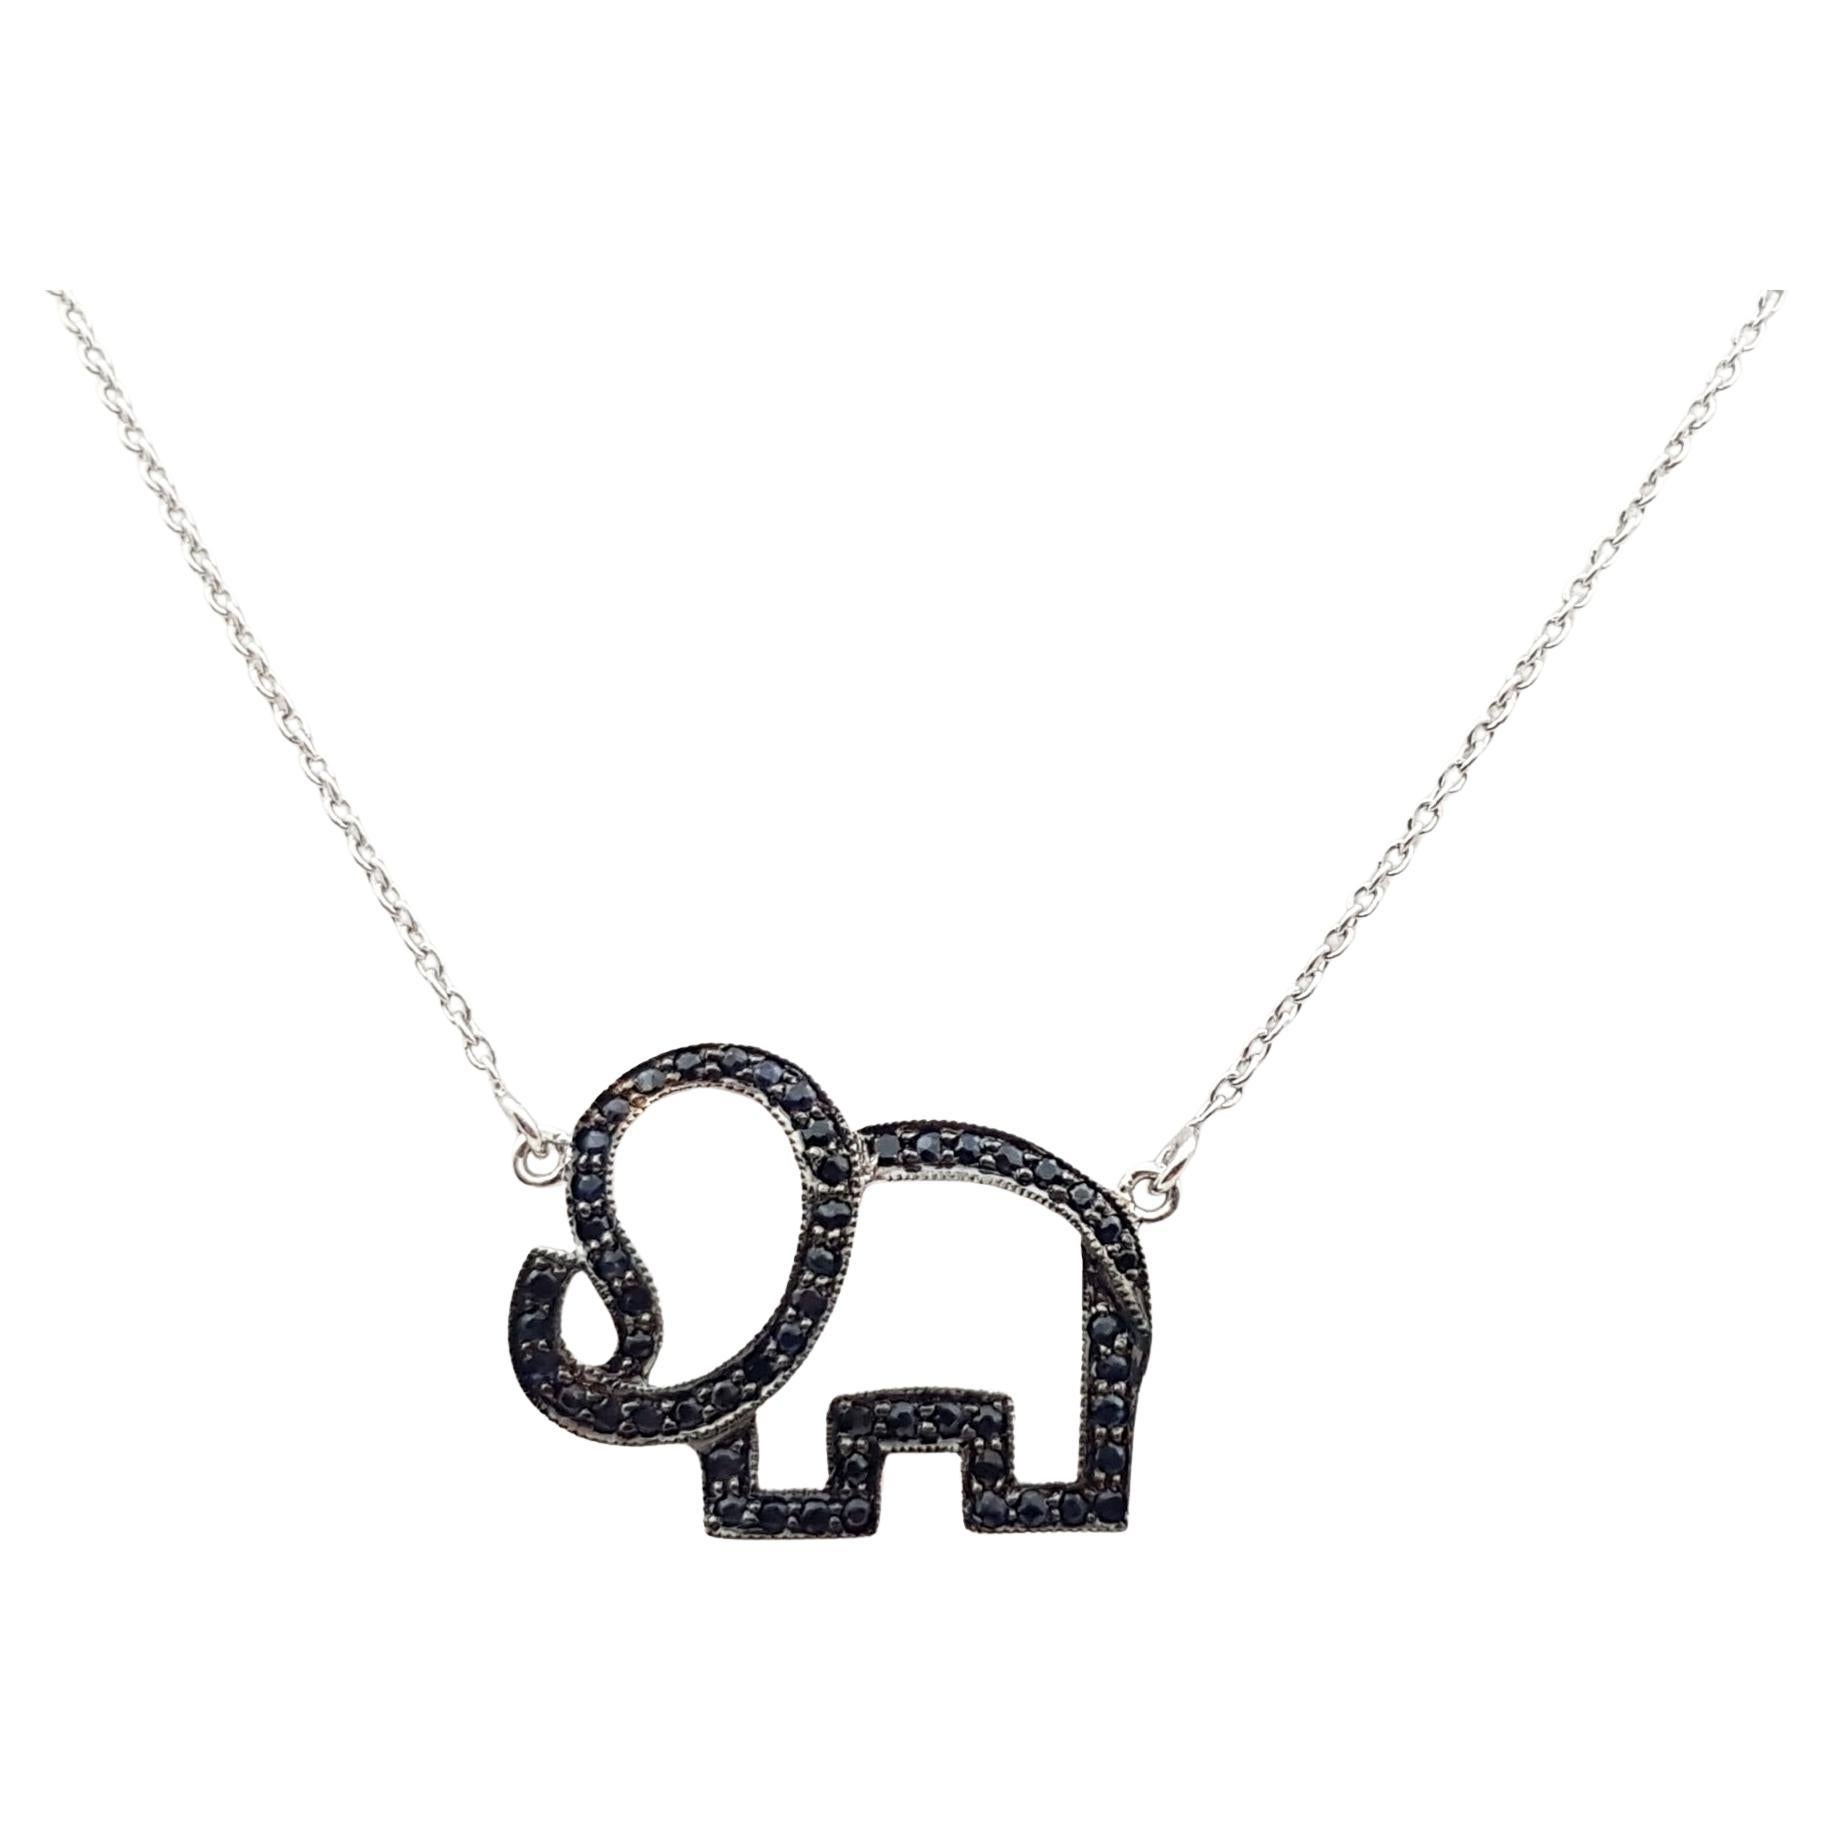 Black Sapphire Elephant Necklace set in Silver Settings